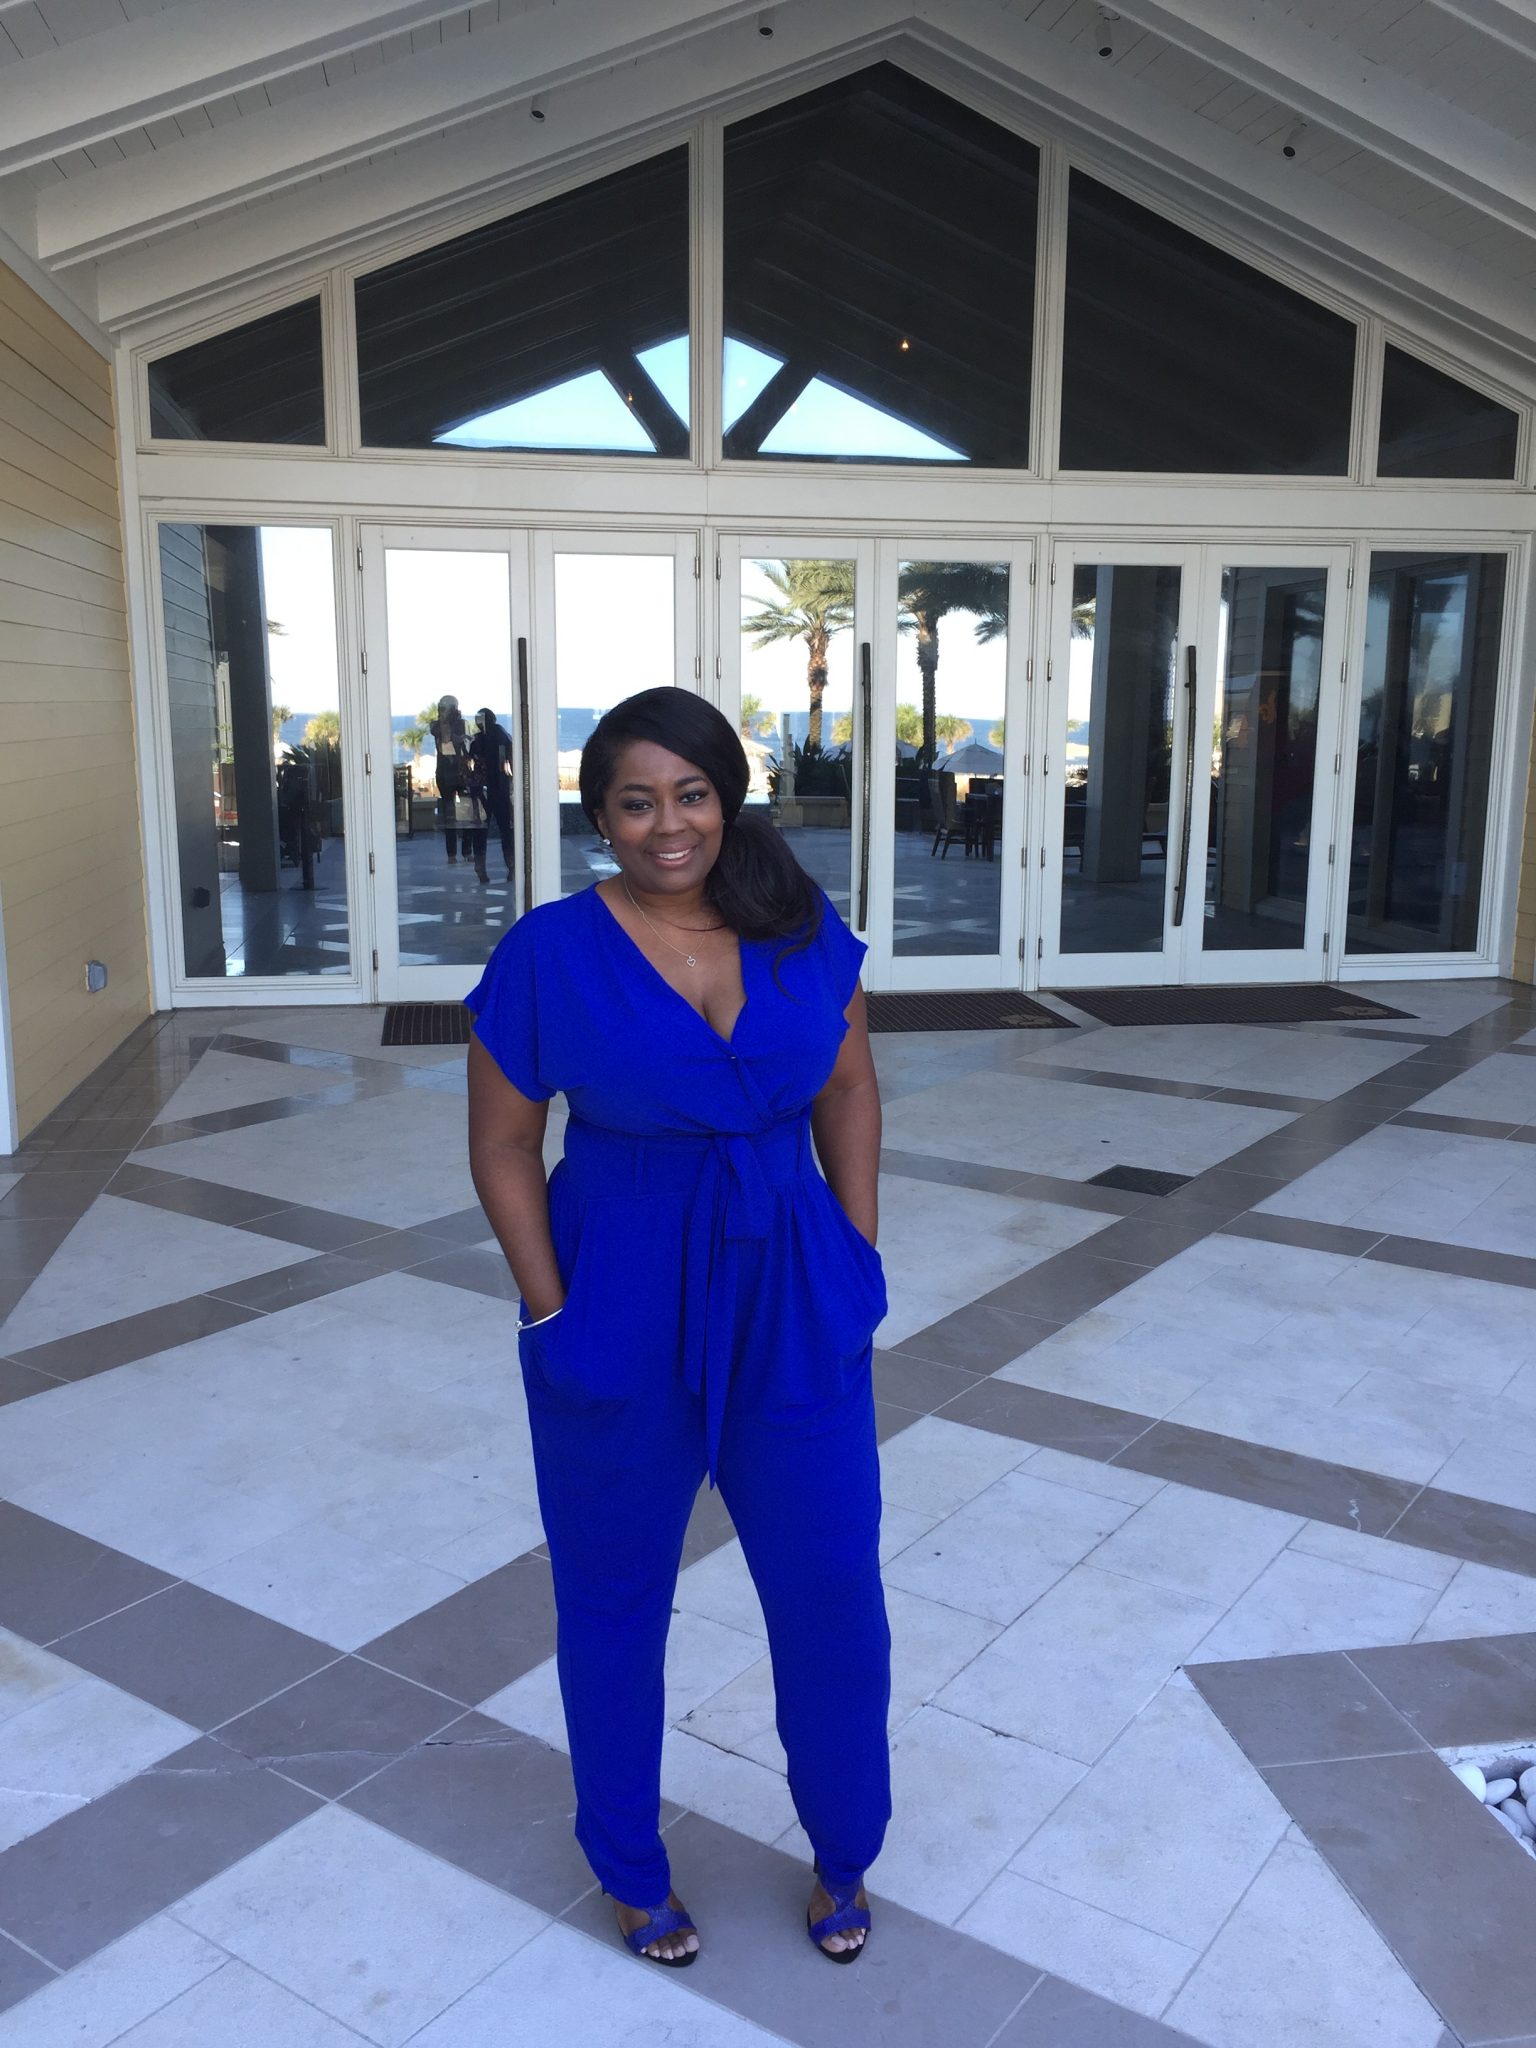 My Style: Jumpsuit With Wrap Top